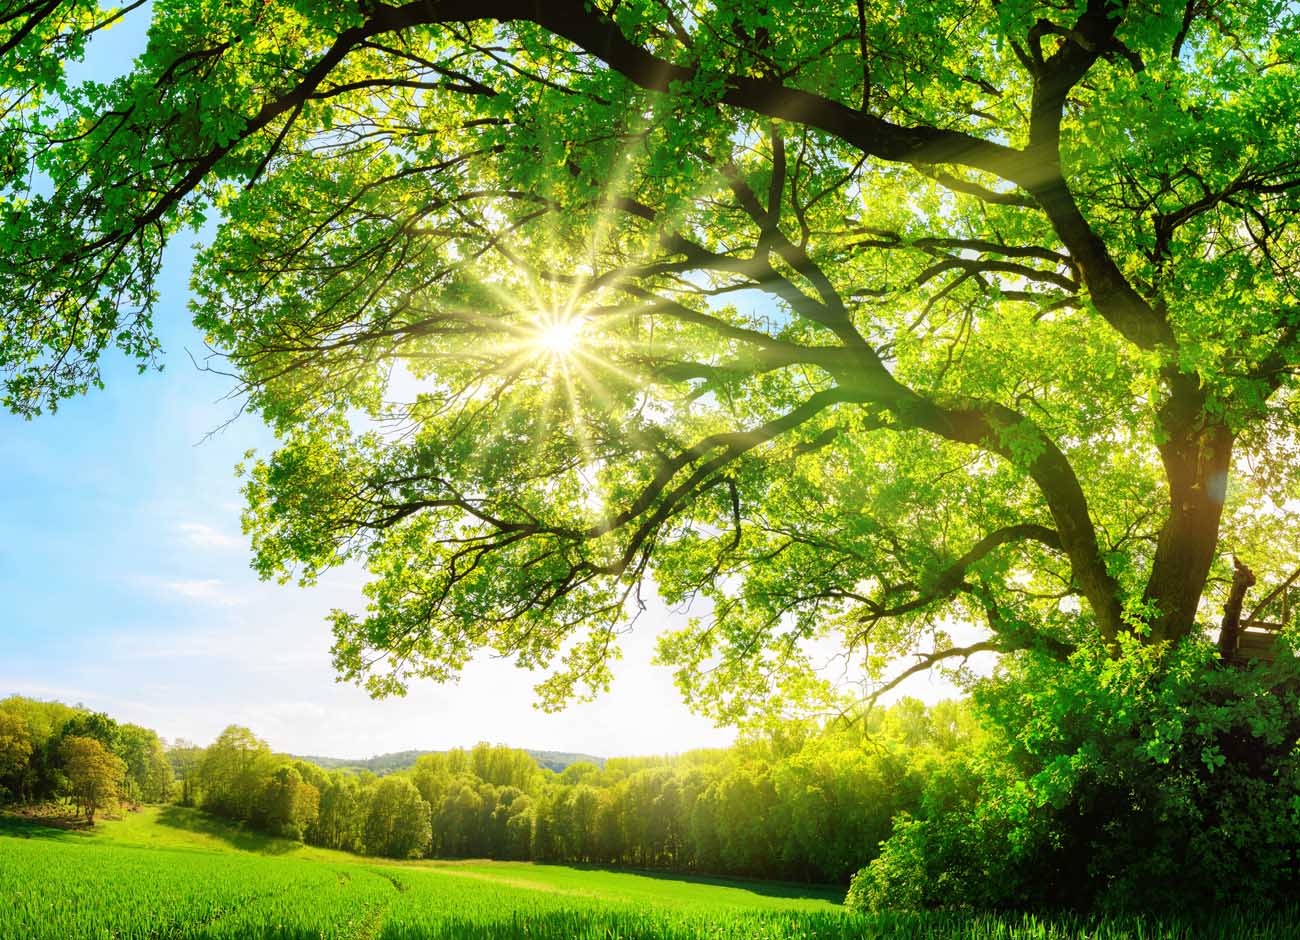 sun shining through large green tree with green fields in background